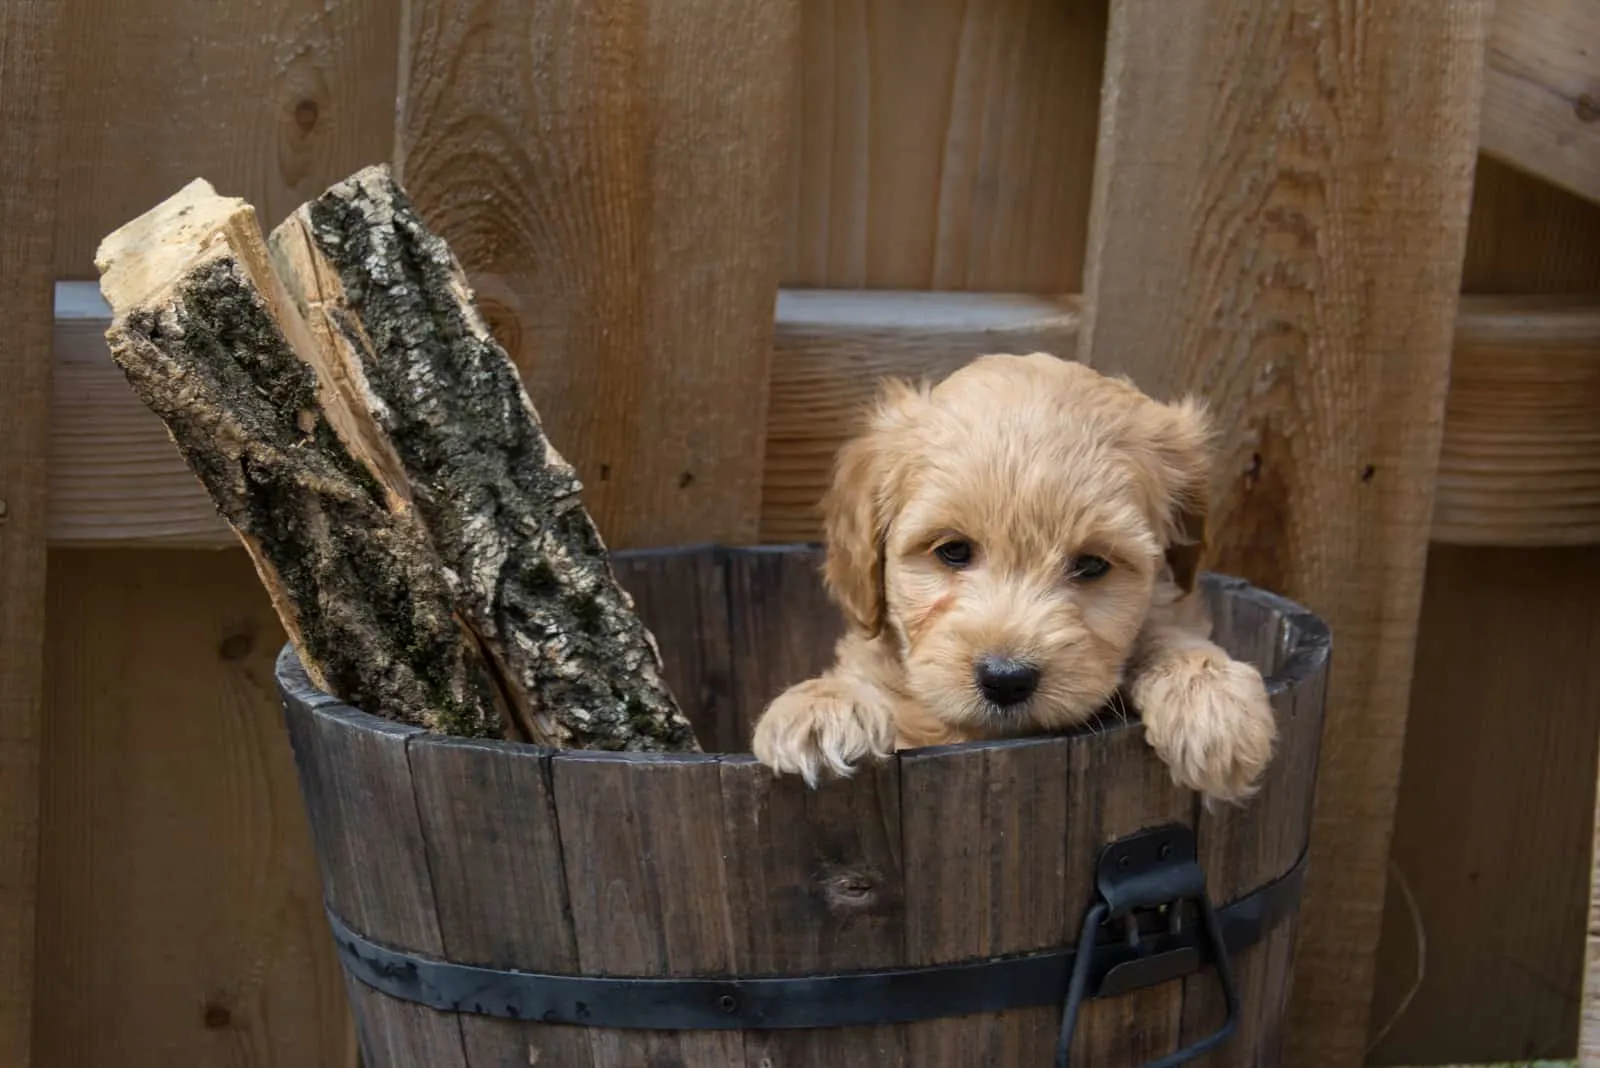 Mini Goldendoodle puppy in a bucket with logs